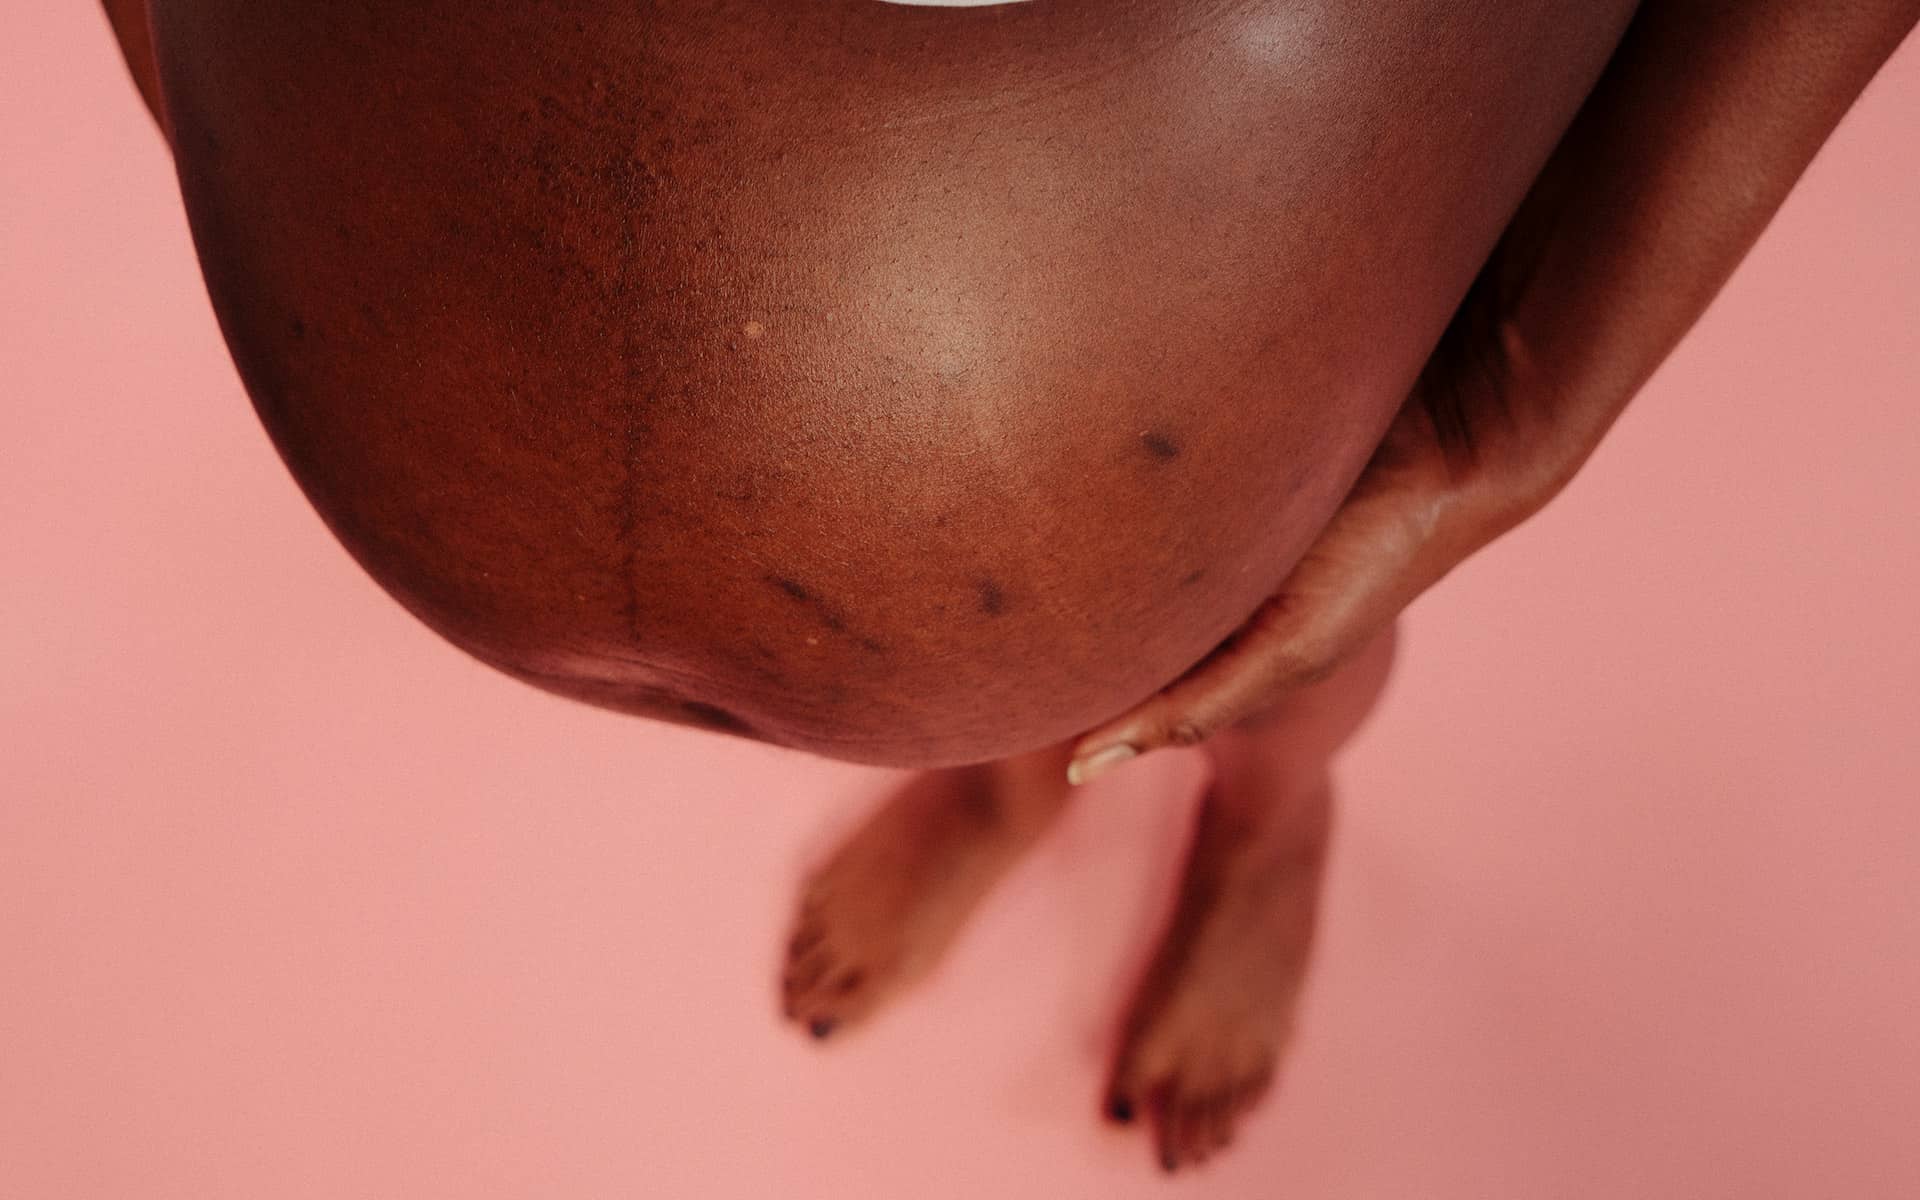 Close-up of a pregnant woman's stomach